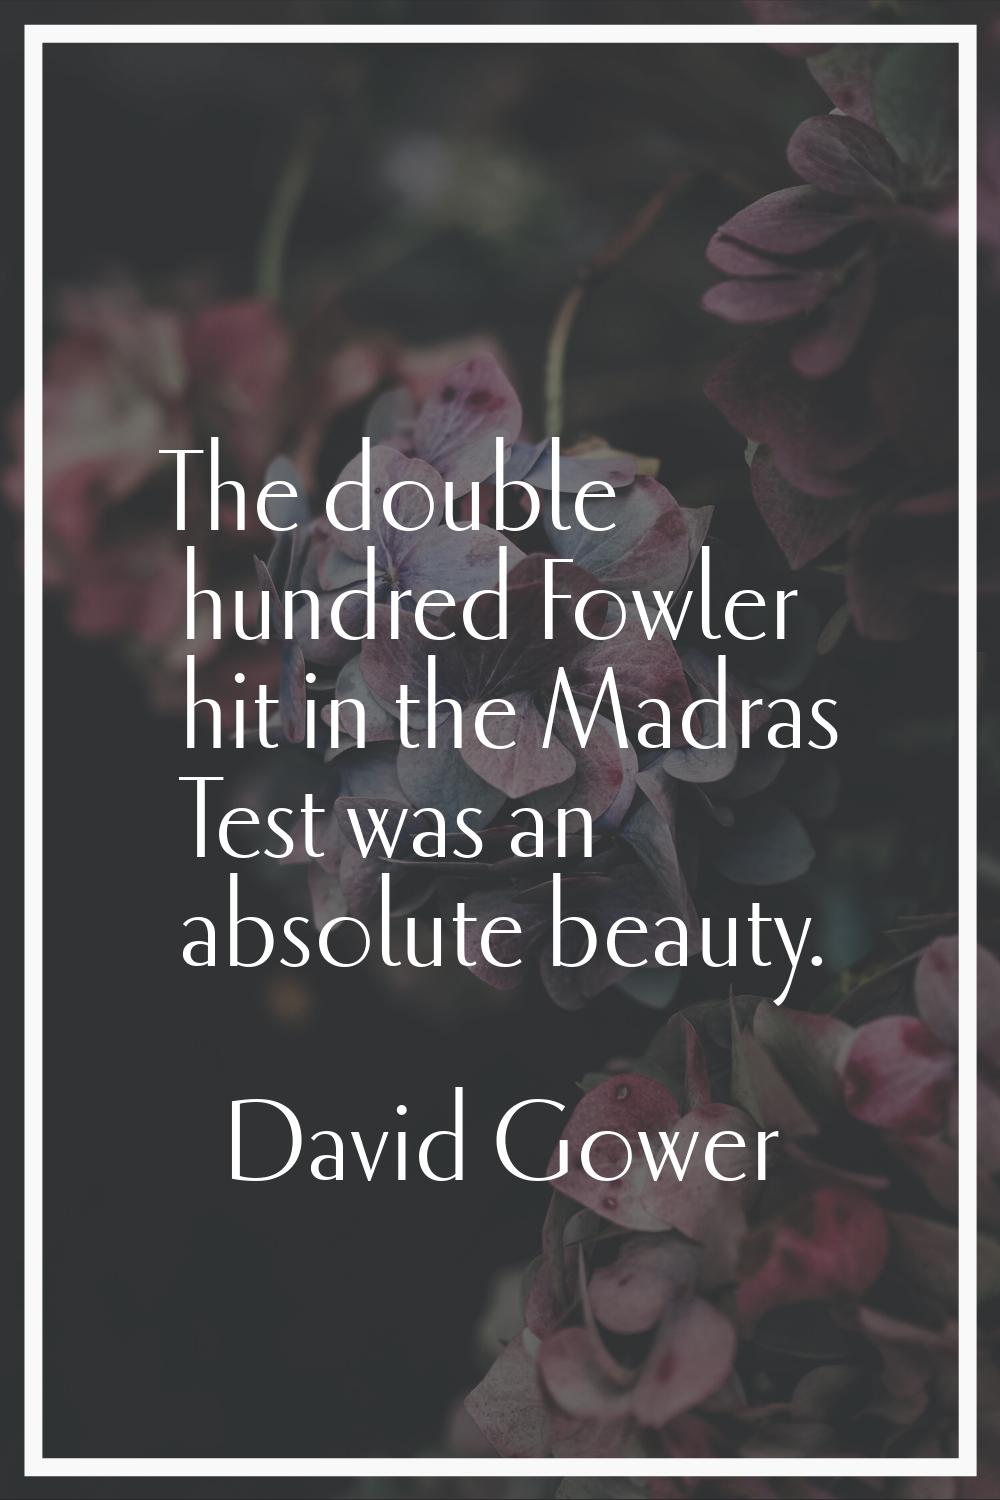 The double hundred Fowler hit in the Madras Test was an absolute beauty.